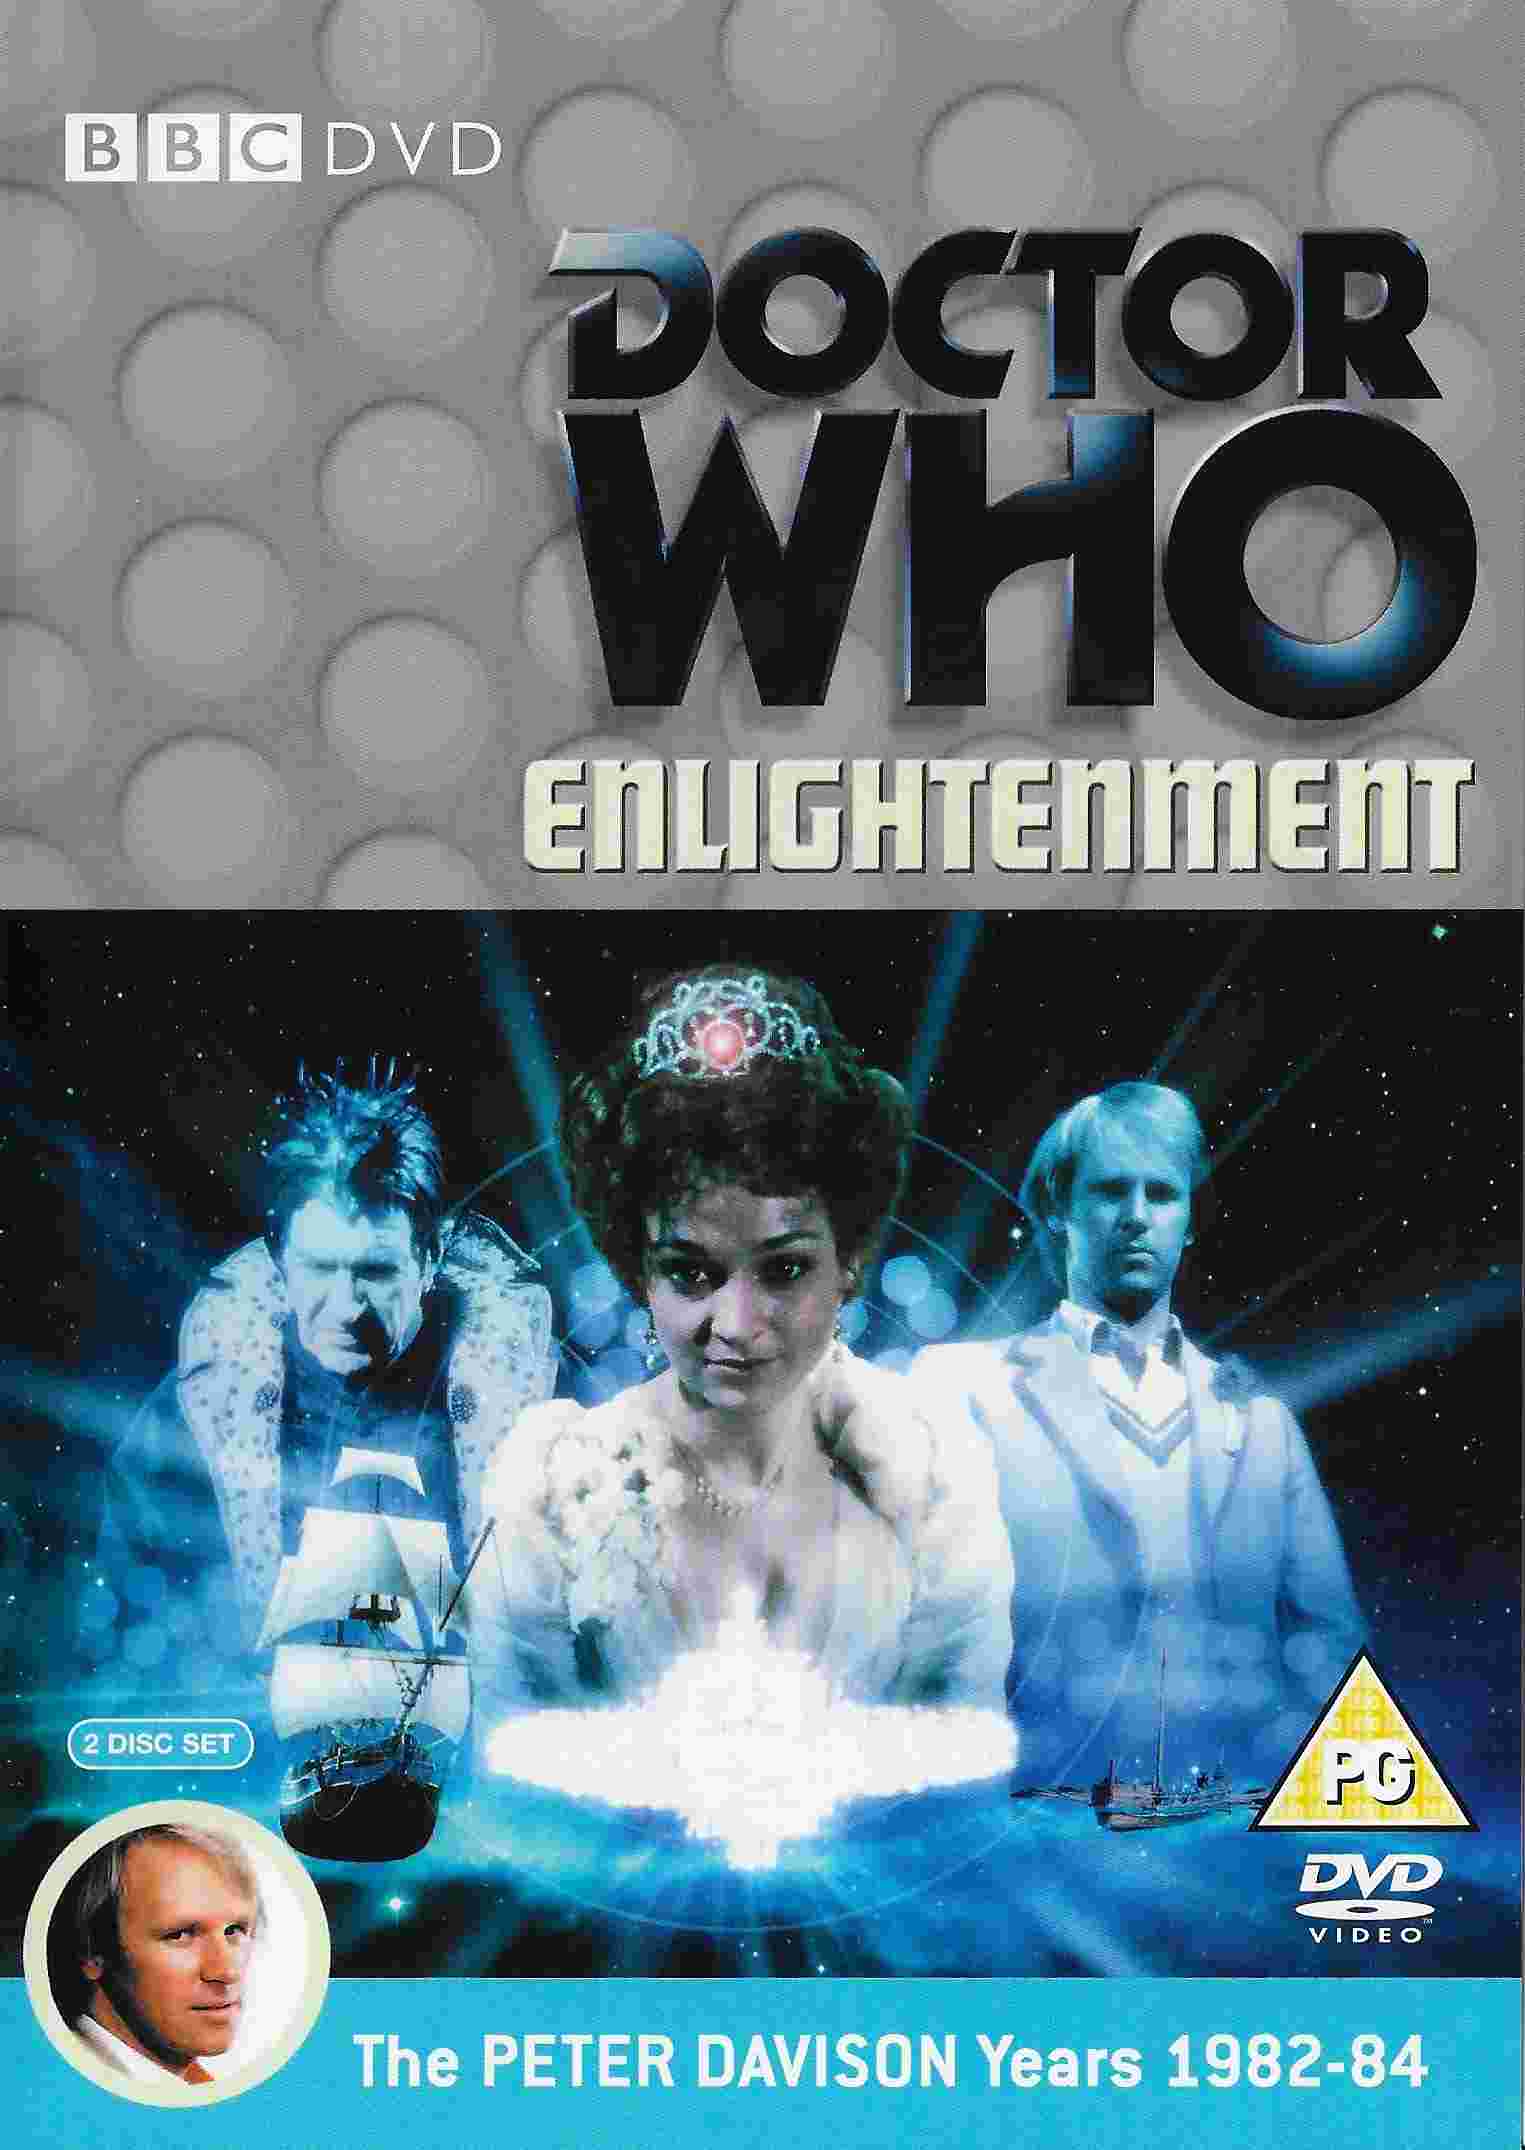 Picture of BBCDVD 2596C Doctor Who - Enlightenment by artist Barbara Clegg from the BBC records and Tapes library